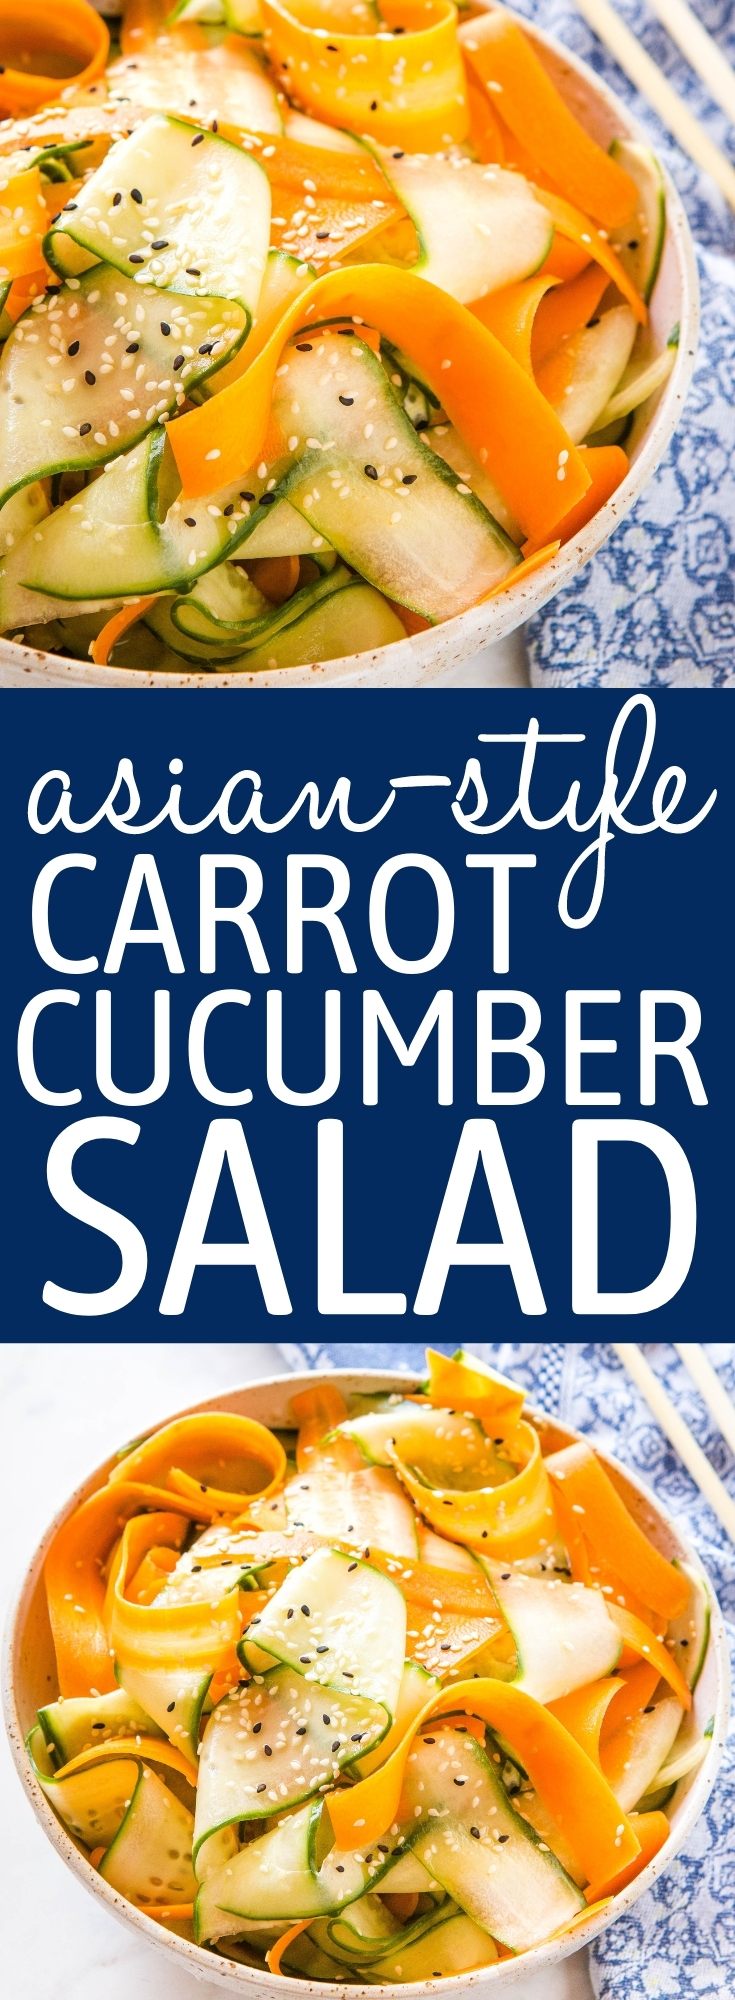 This Asian Cucumber Salad with Carrots is a fresh & healthy side dish made with veggies and an easy sesame dressing. Ready in 10 minutes and perfect for meal prep! Recipe from thebusybaker.ca! #asiancucumbersalad #carrotsalad #easysalad #mealprep #sidedish #healthy #vegan #vegetarian #plantbased #asian via @busybakerblog